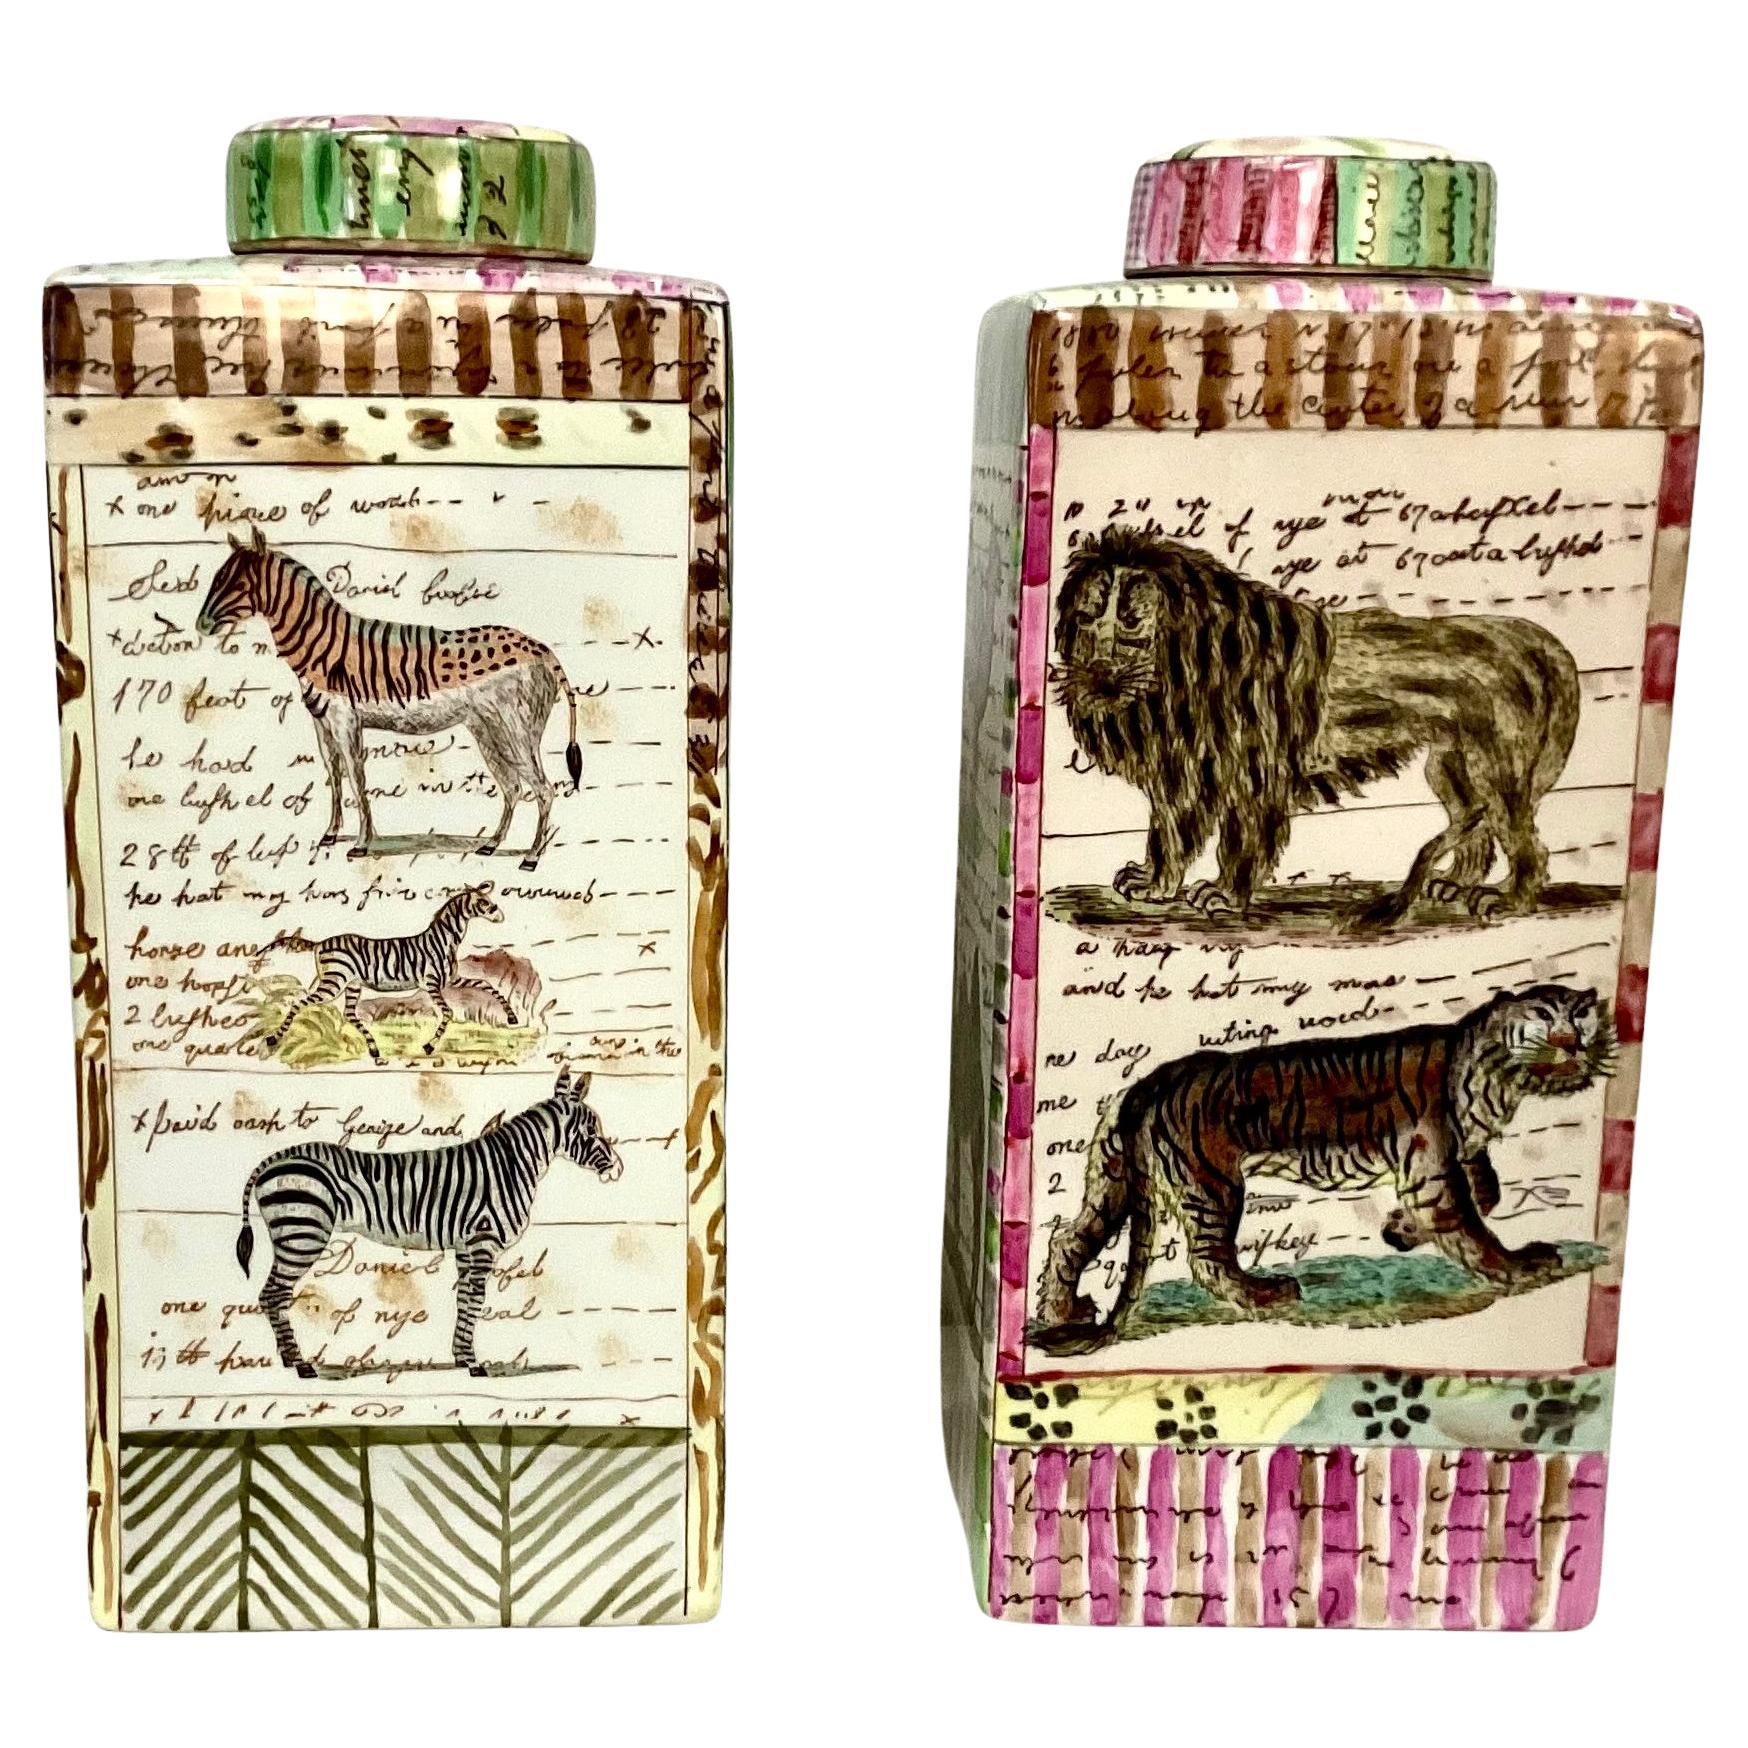 Pair of 20th century porcelain jungle-themed lidded jars by New York designer, John Derian. Elegant vases feature multiple jungle animals including elephants, tigers, monkeys and zebras set against script writing and stripes in pink, green and